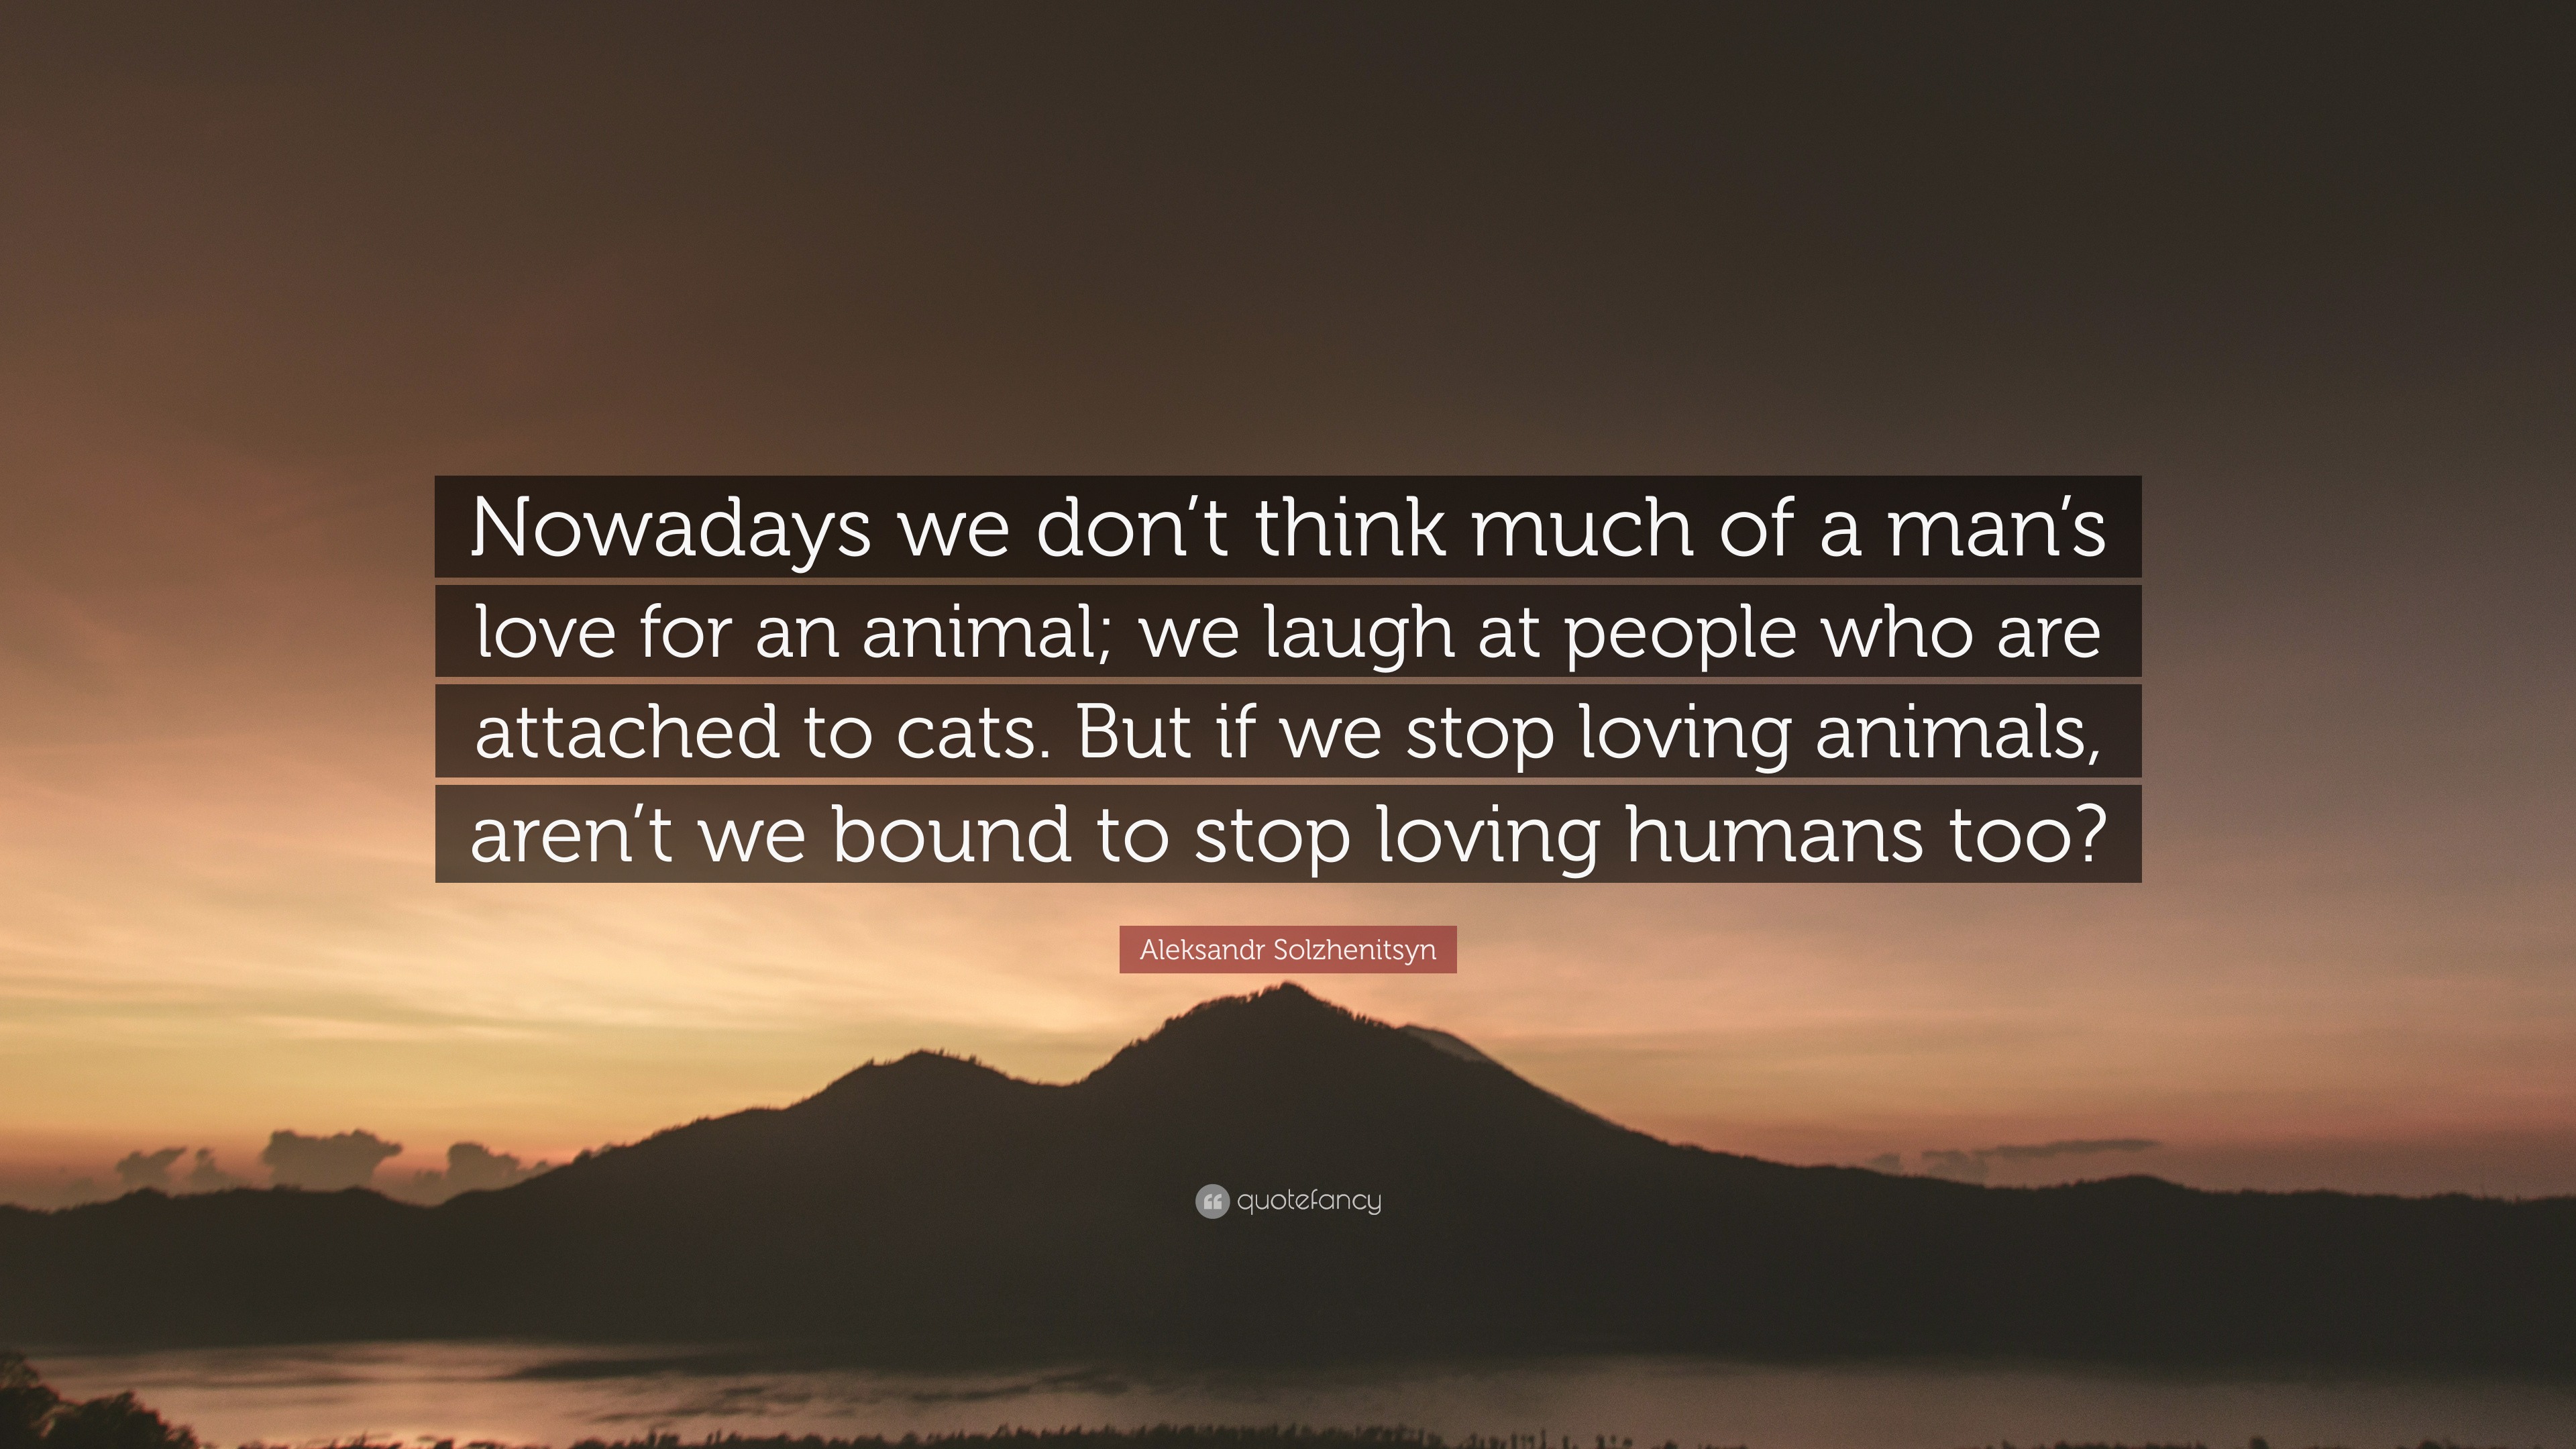 Aleksandr Solzhenitsyn Quote “Nowadays we don t think much of a man s love